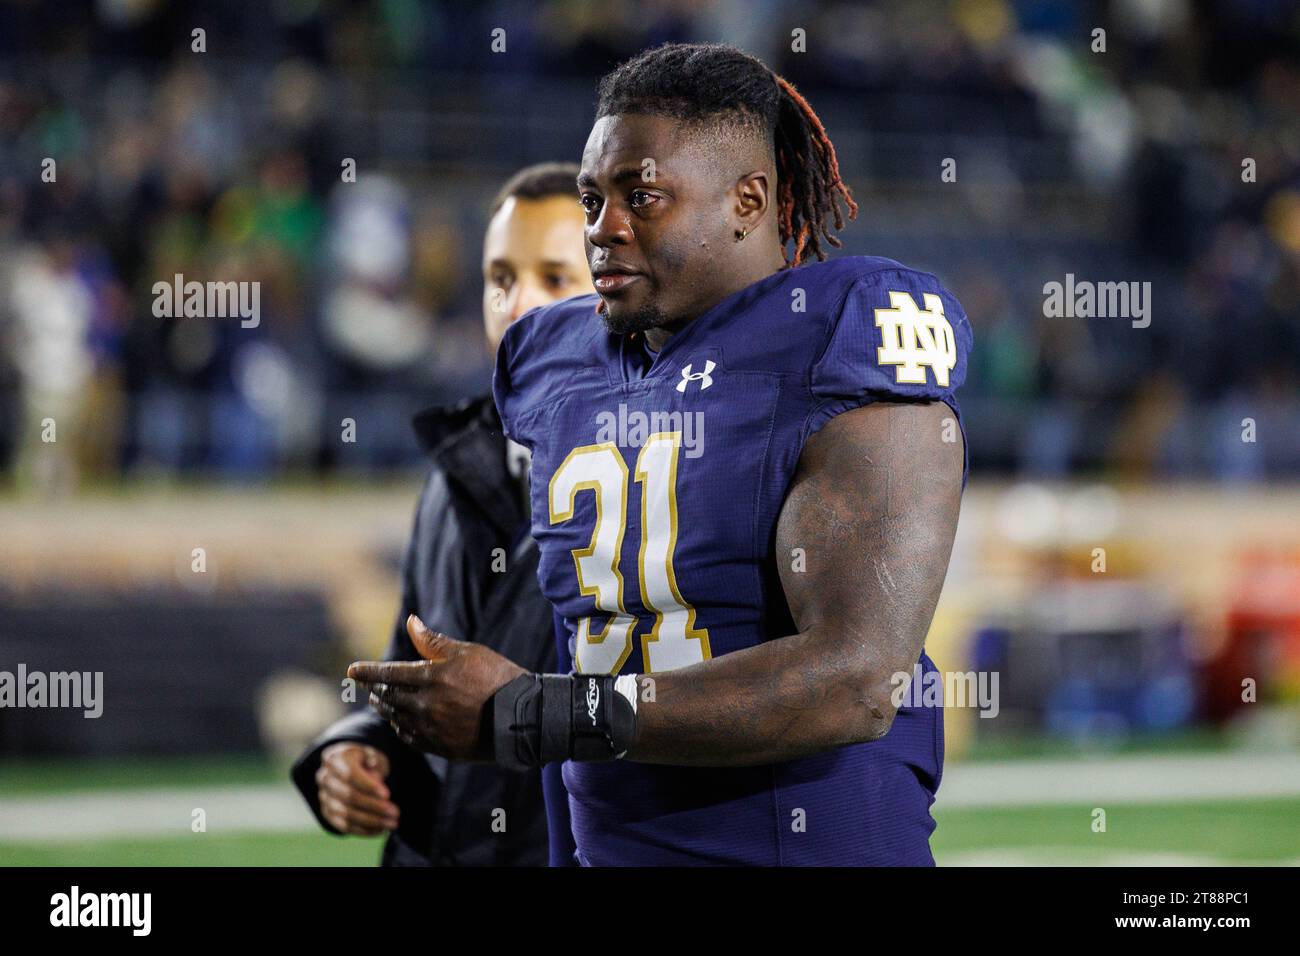 South Bend, Indiana, USA. 18th Nov, 2023. Notre Dame defensive lineman Nana Osafo-Mensah (31) walks off the field with tears in his eyes after NCAA football game action between the Wake Forest Demon Deacons and the Notre Dame Fighting Irish at Notre Dame Stadium in South Bend, Indiana. Notre Dame defeated Wake Forest 45-7. John Mersits/CSM/Alamy Live News Stock Photo